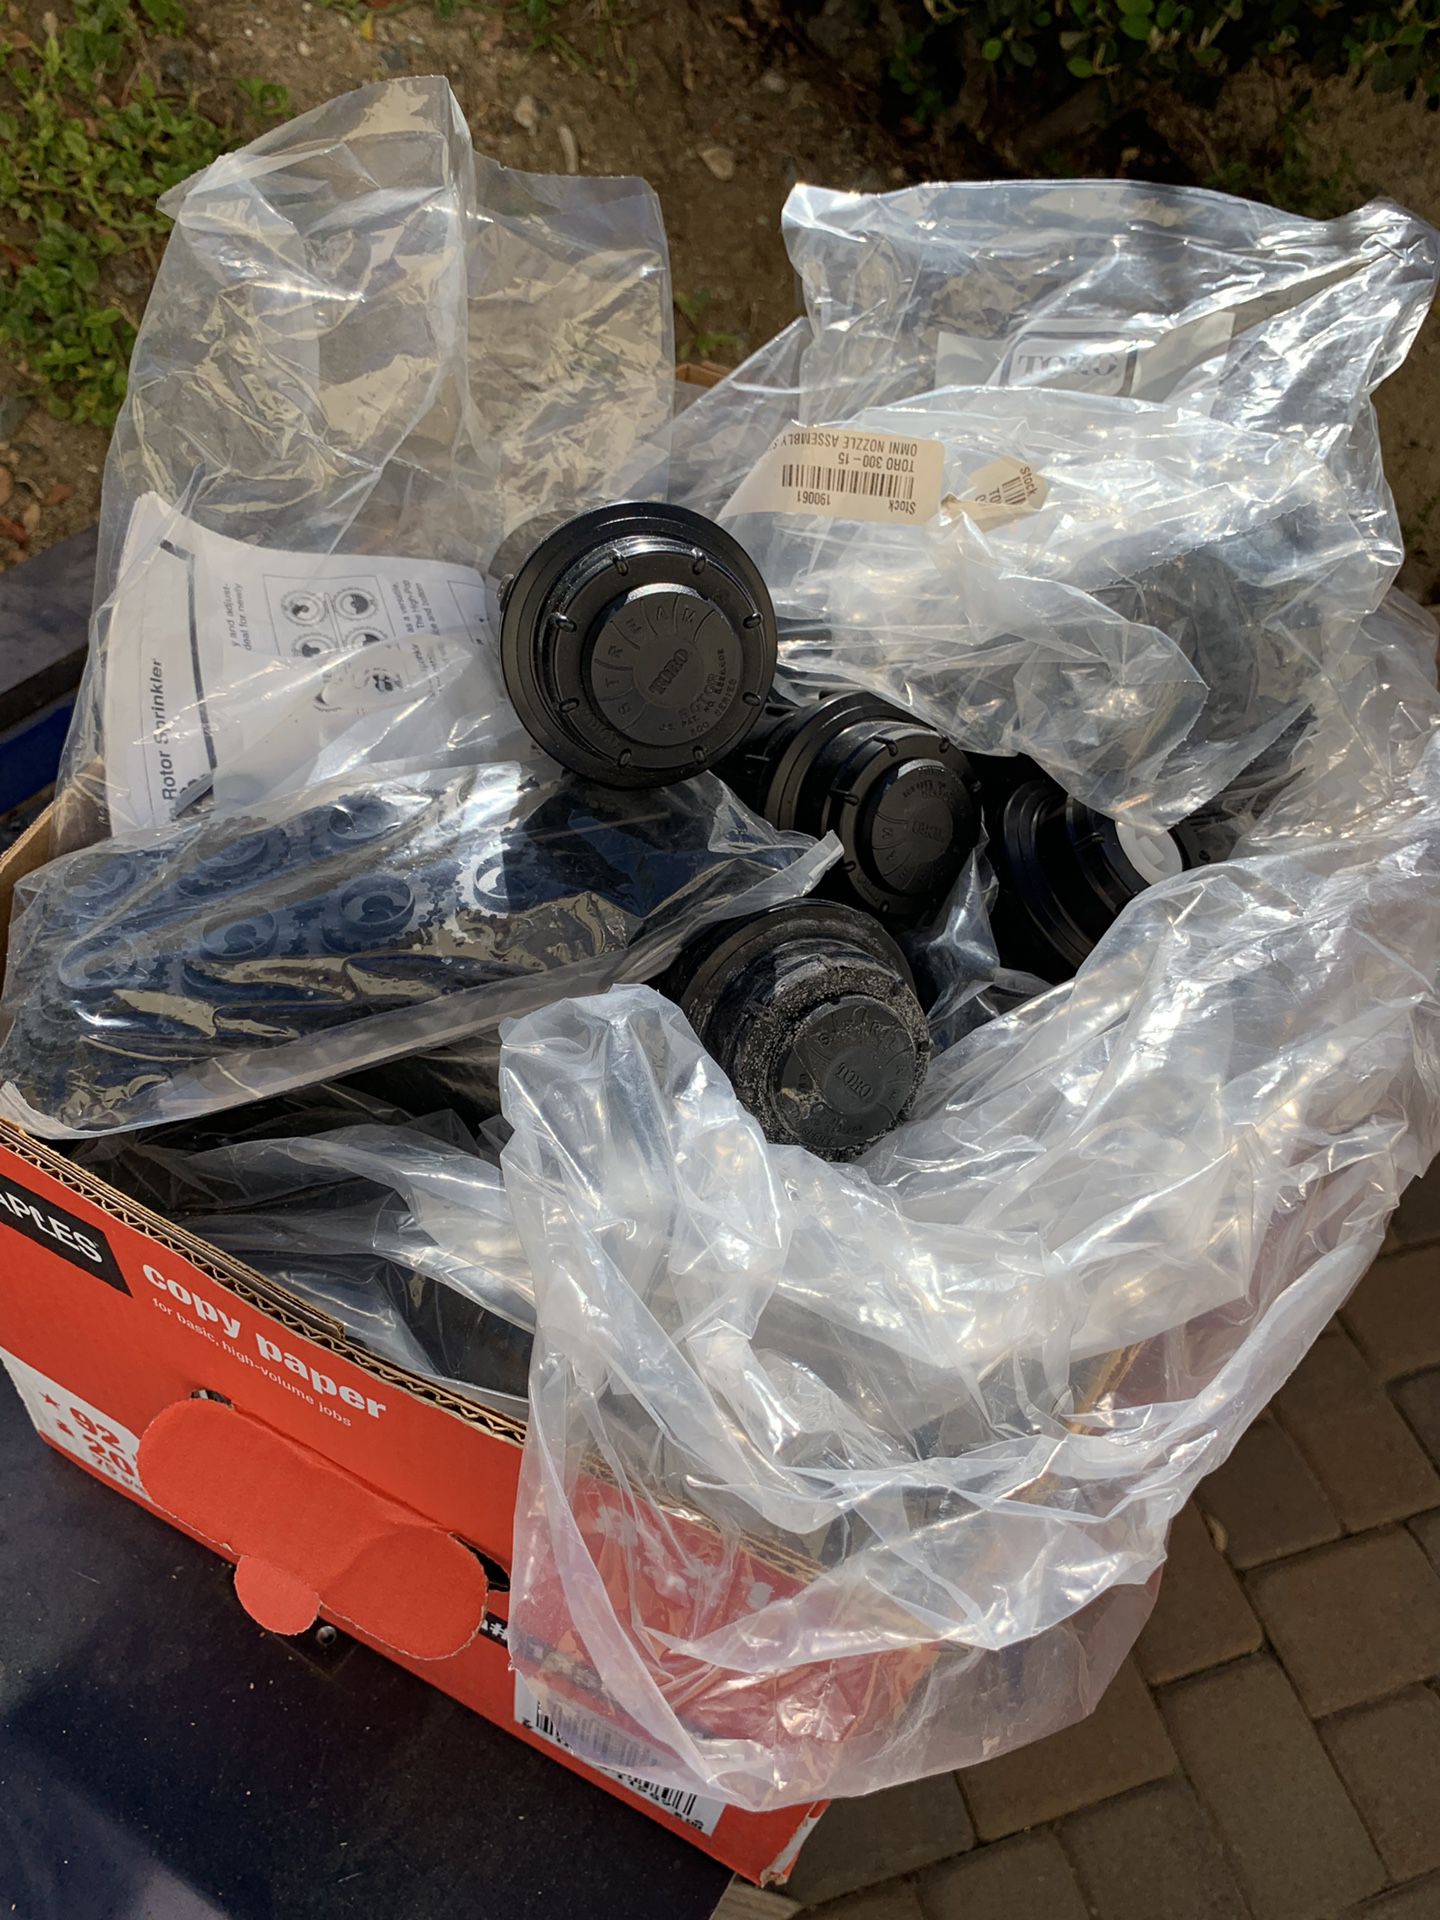 A huge box of toro pop up sprinkler heads and nozzle